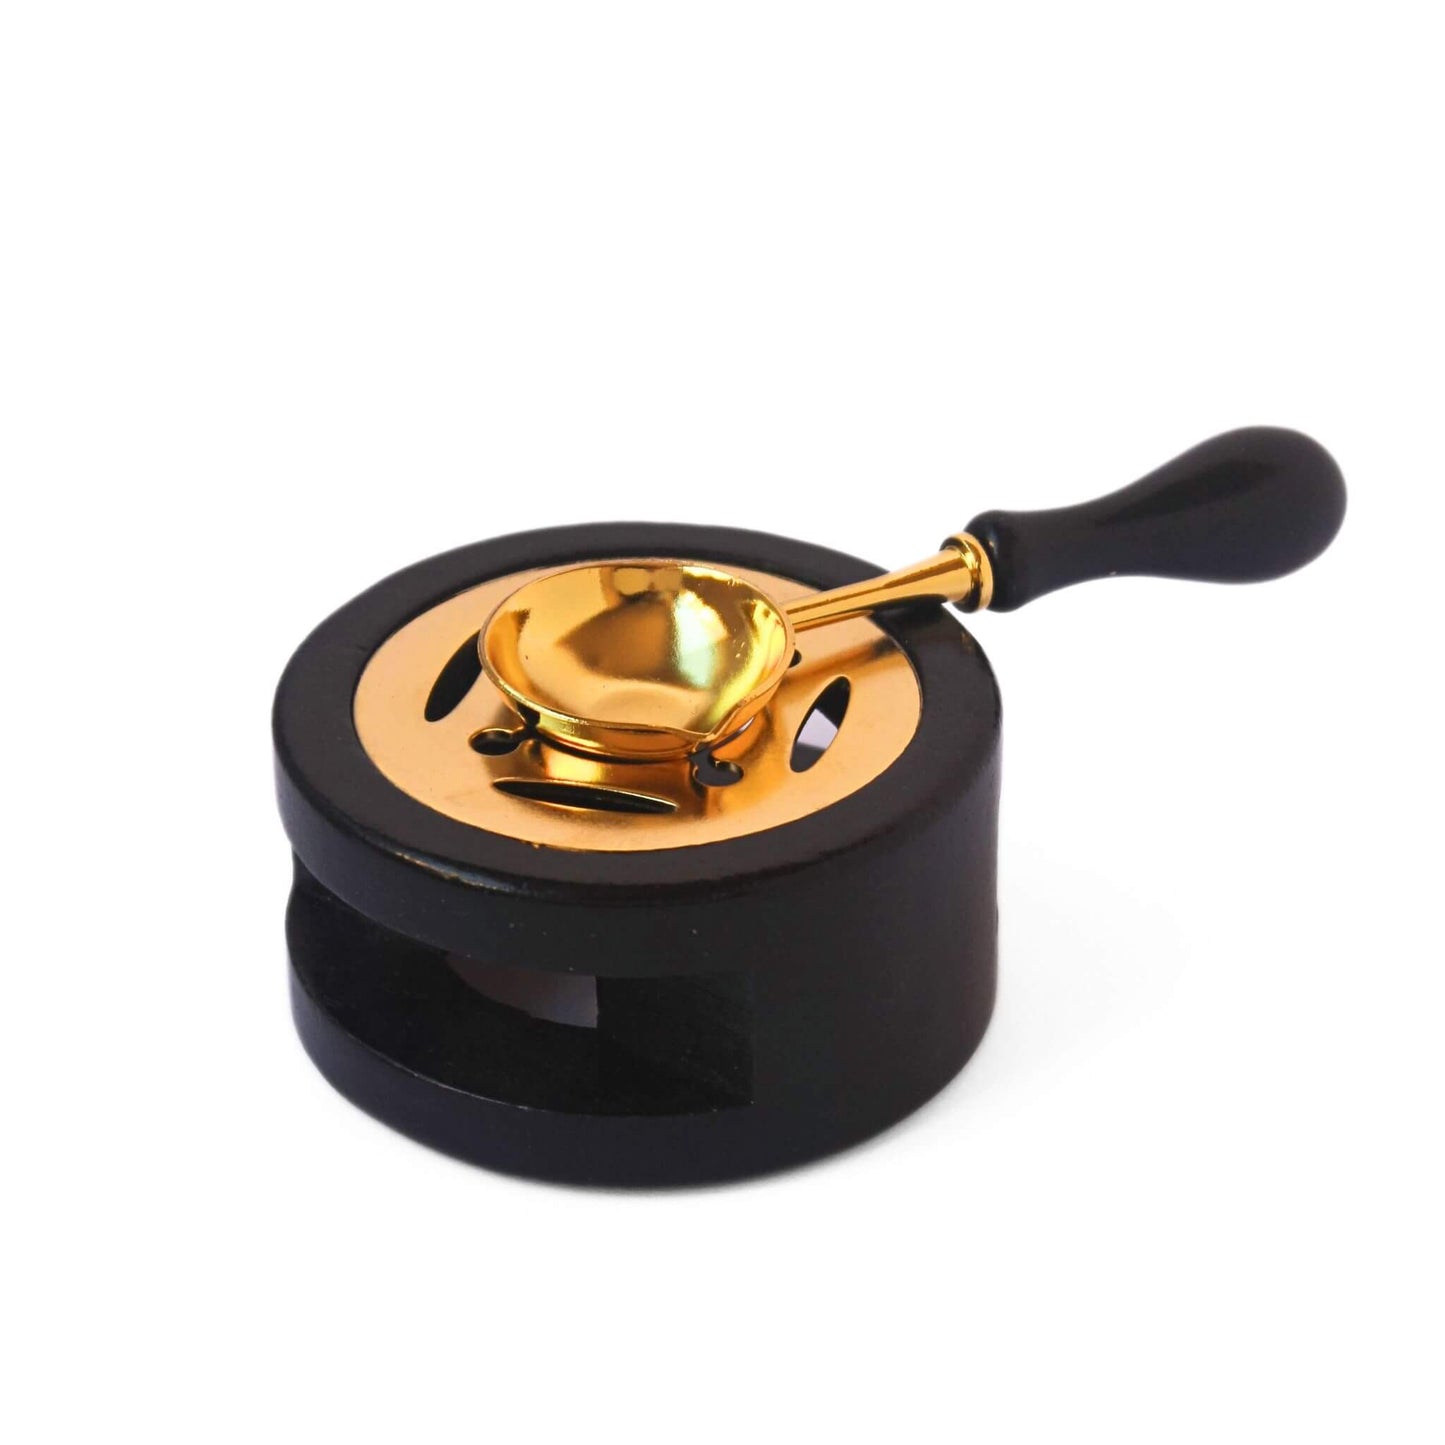 black wood and gold metal wax sealing stove with matching spoon sitting on top on white background